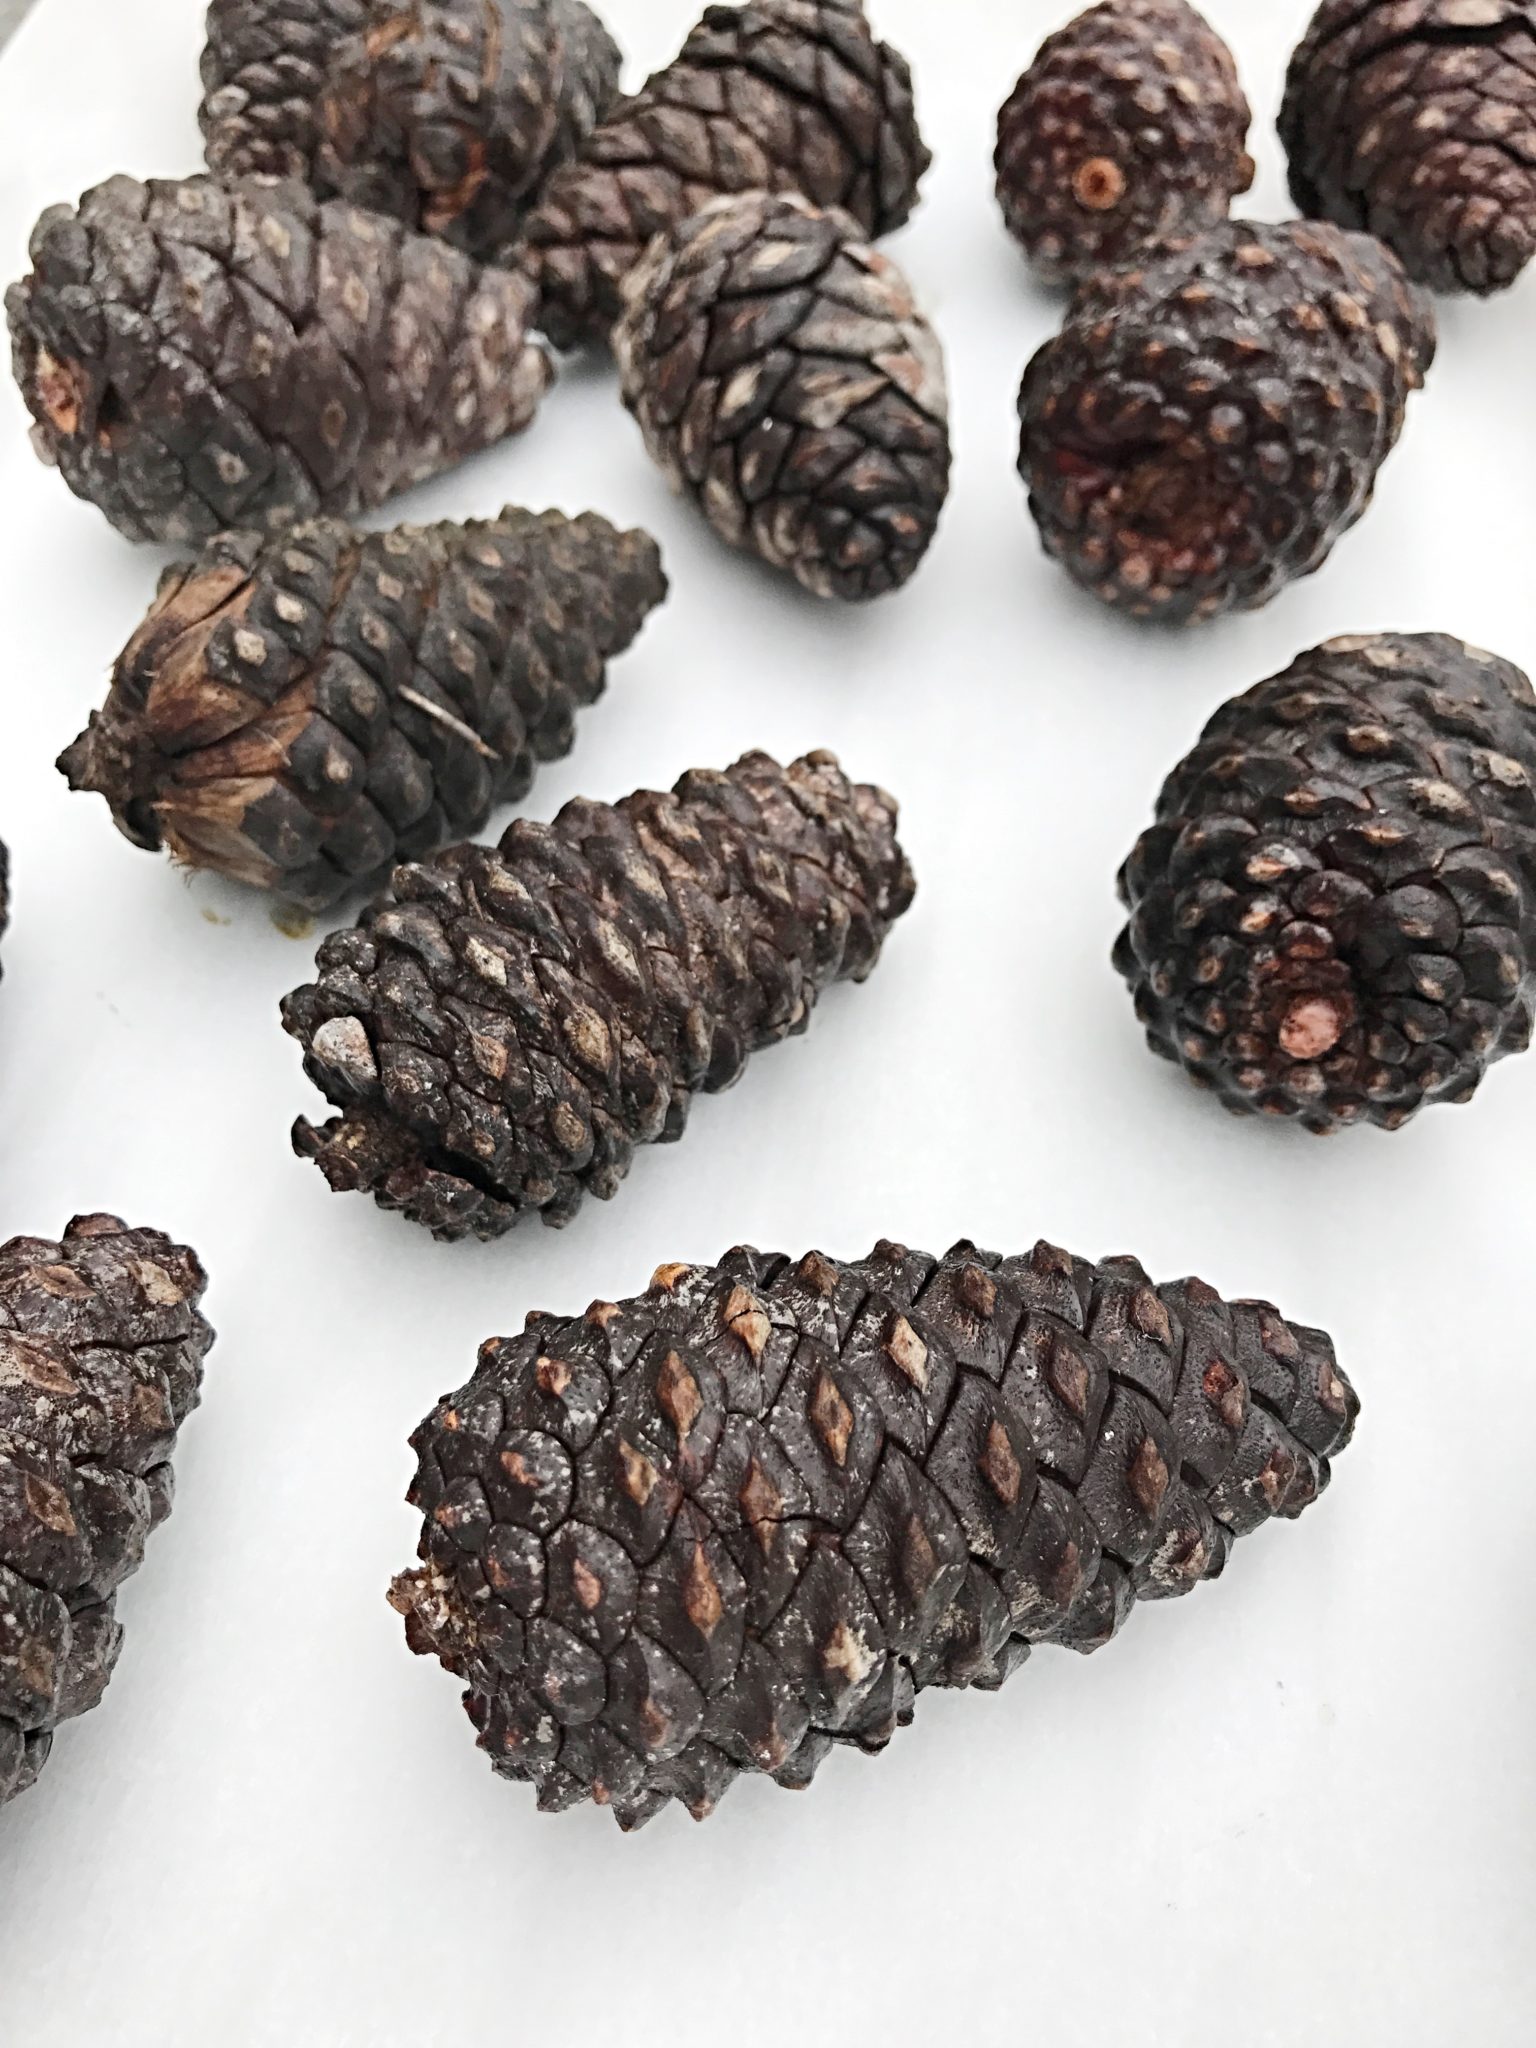 How To Clean Pine Cones For Crafts Step-by-Step (Bye Bugs!)